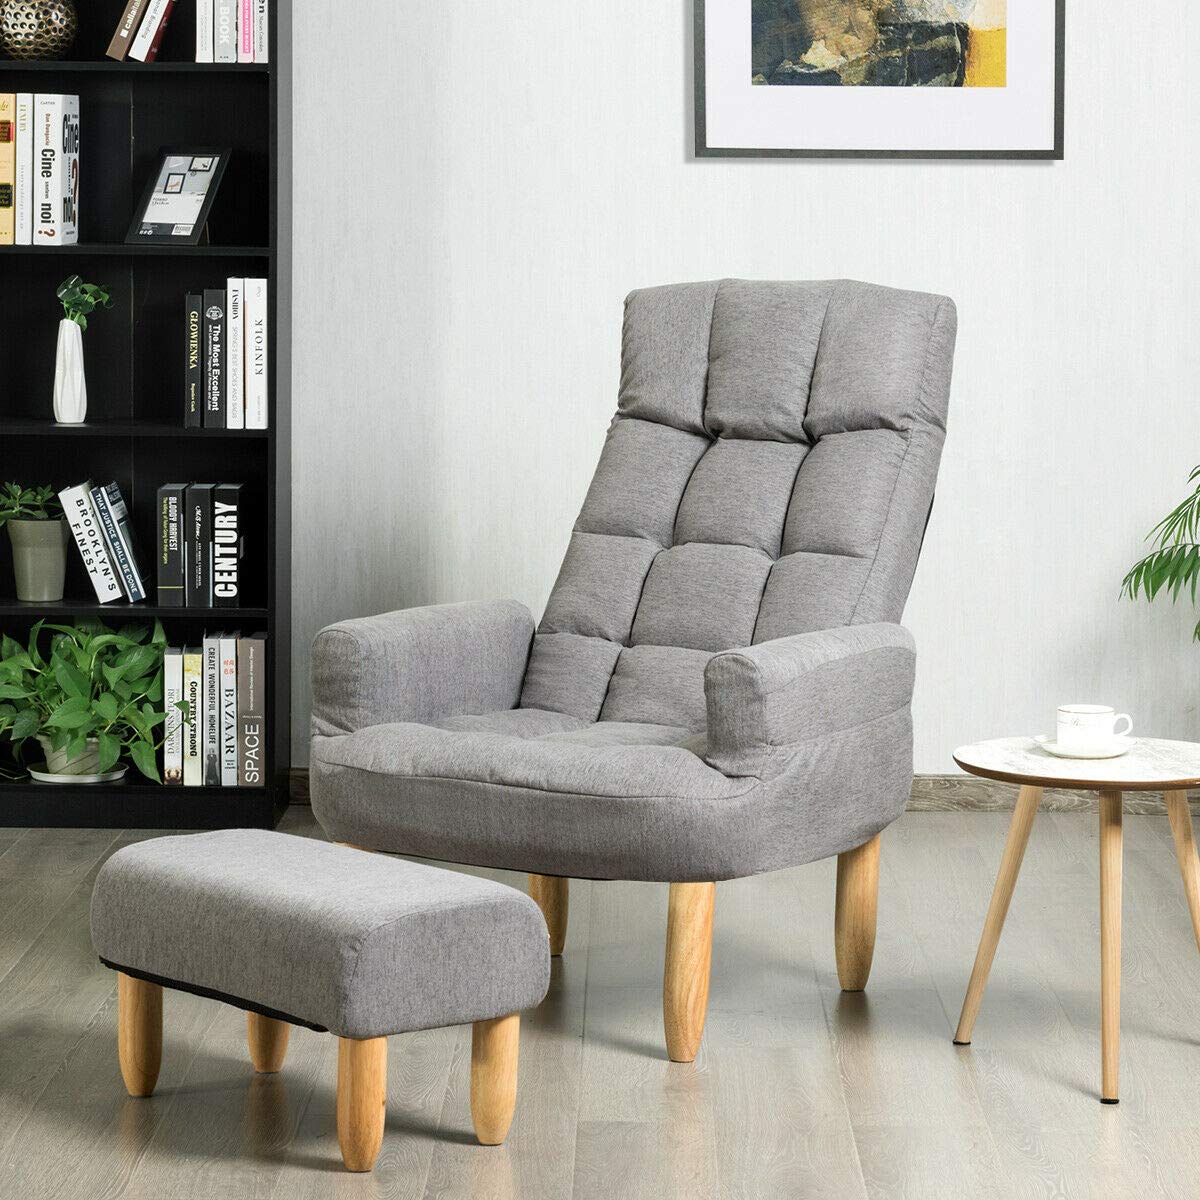 Key Features and Benefits of Reading Sofa Chairs缩略图